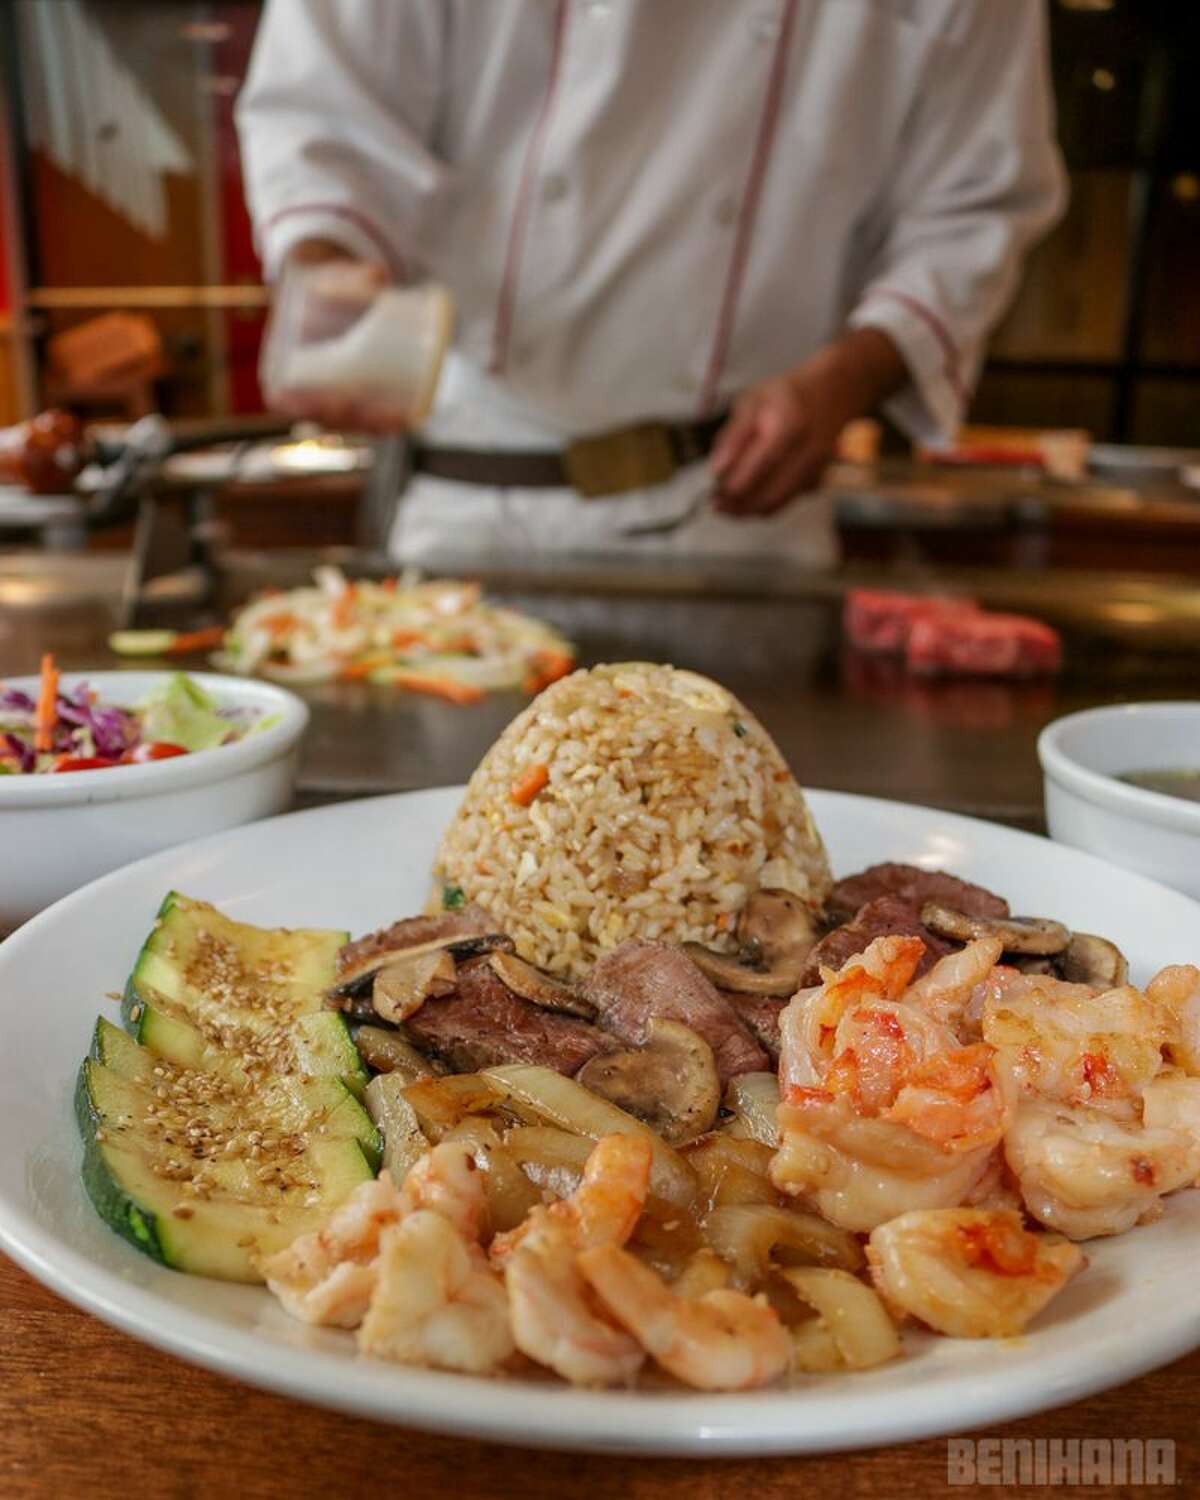 Benihana is national brand that provides, “High-quality Japanese cuisine served up in a fun-filled, engaging teppanyaki experience,” according to a press release. The brand has 103 locations nationwide.